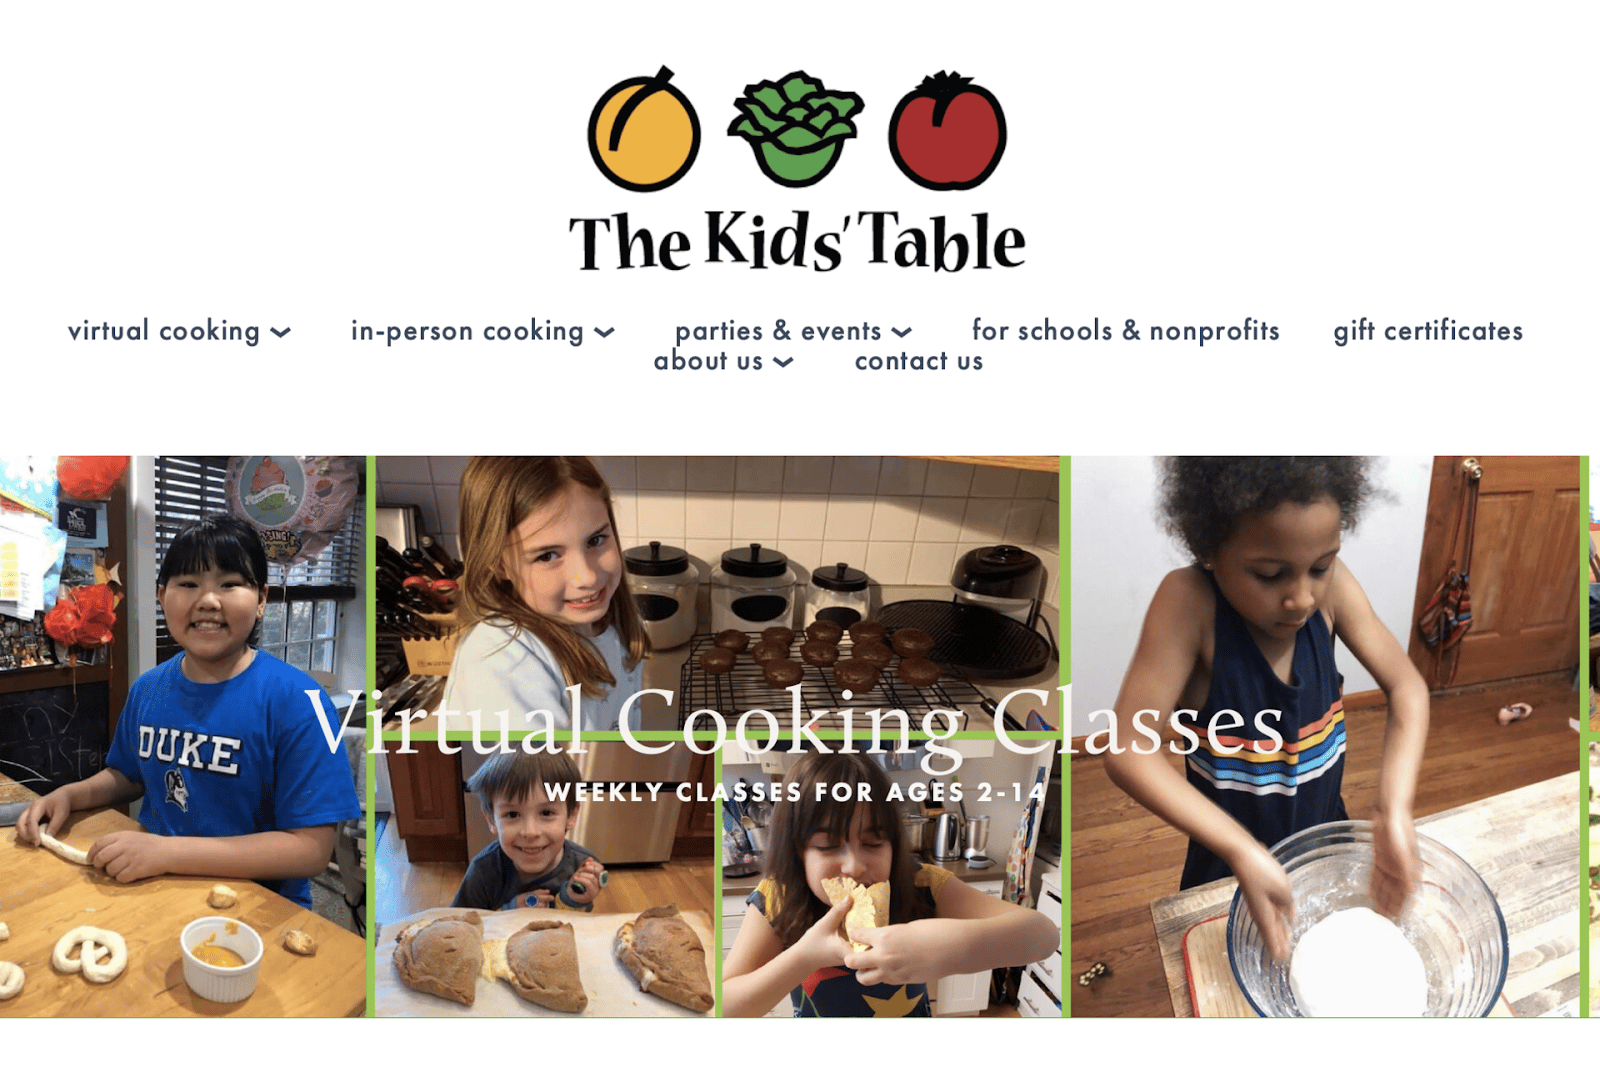 Childcare event - virtual cooking class